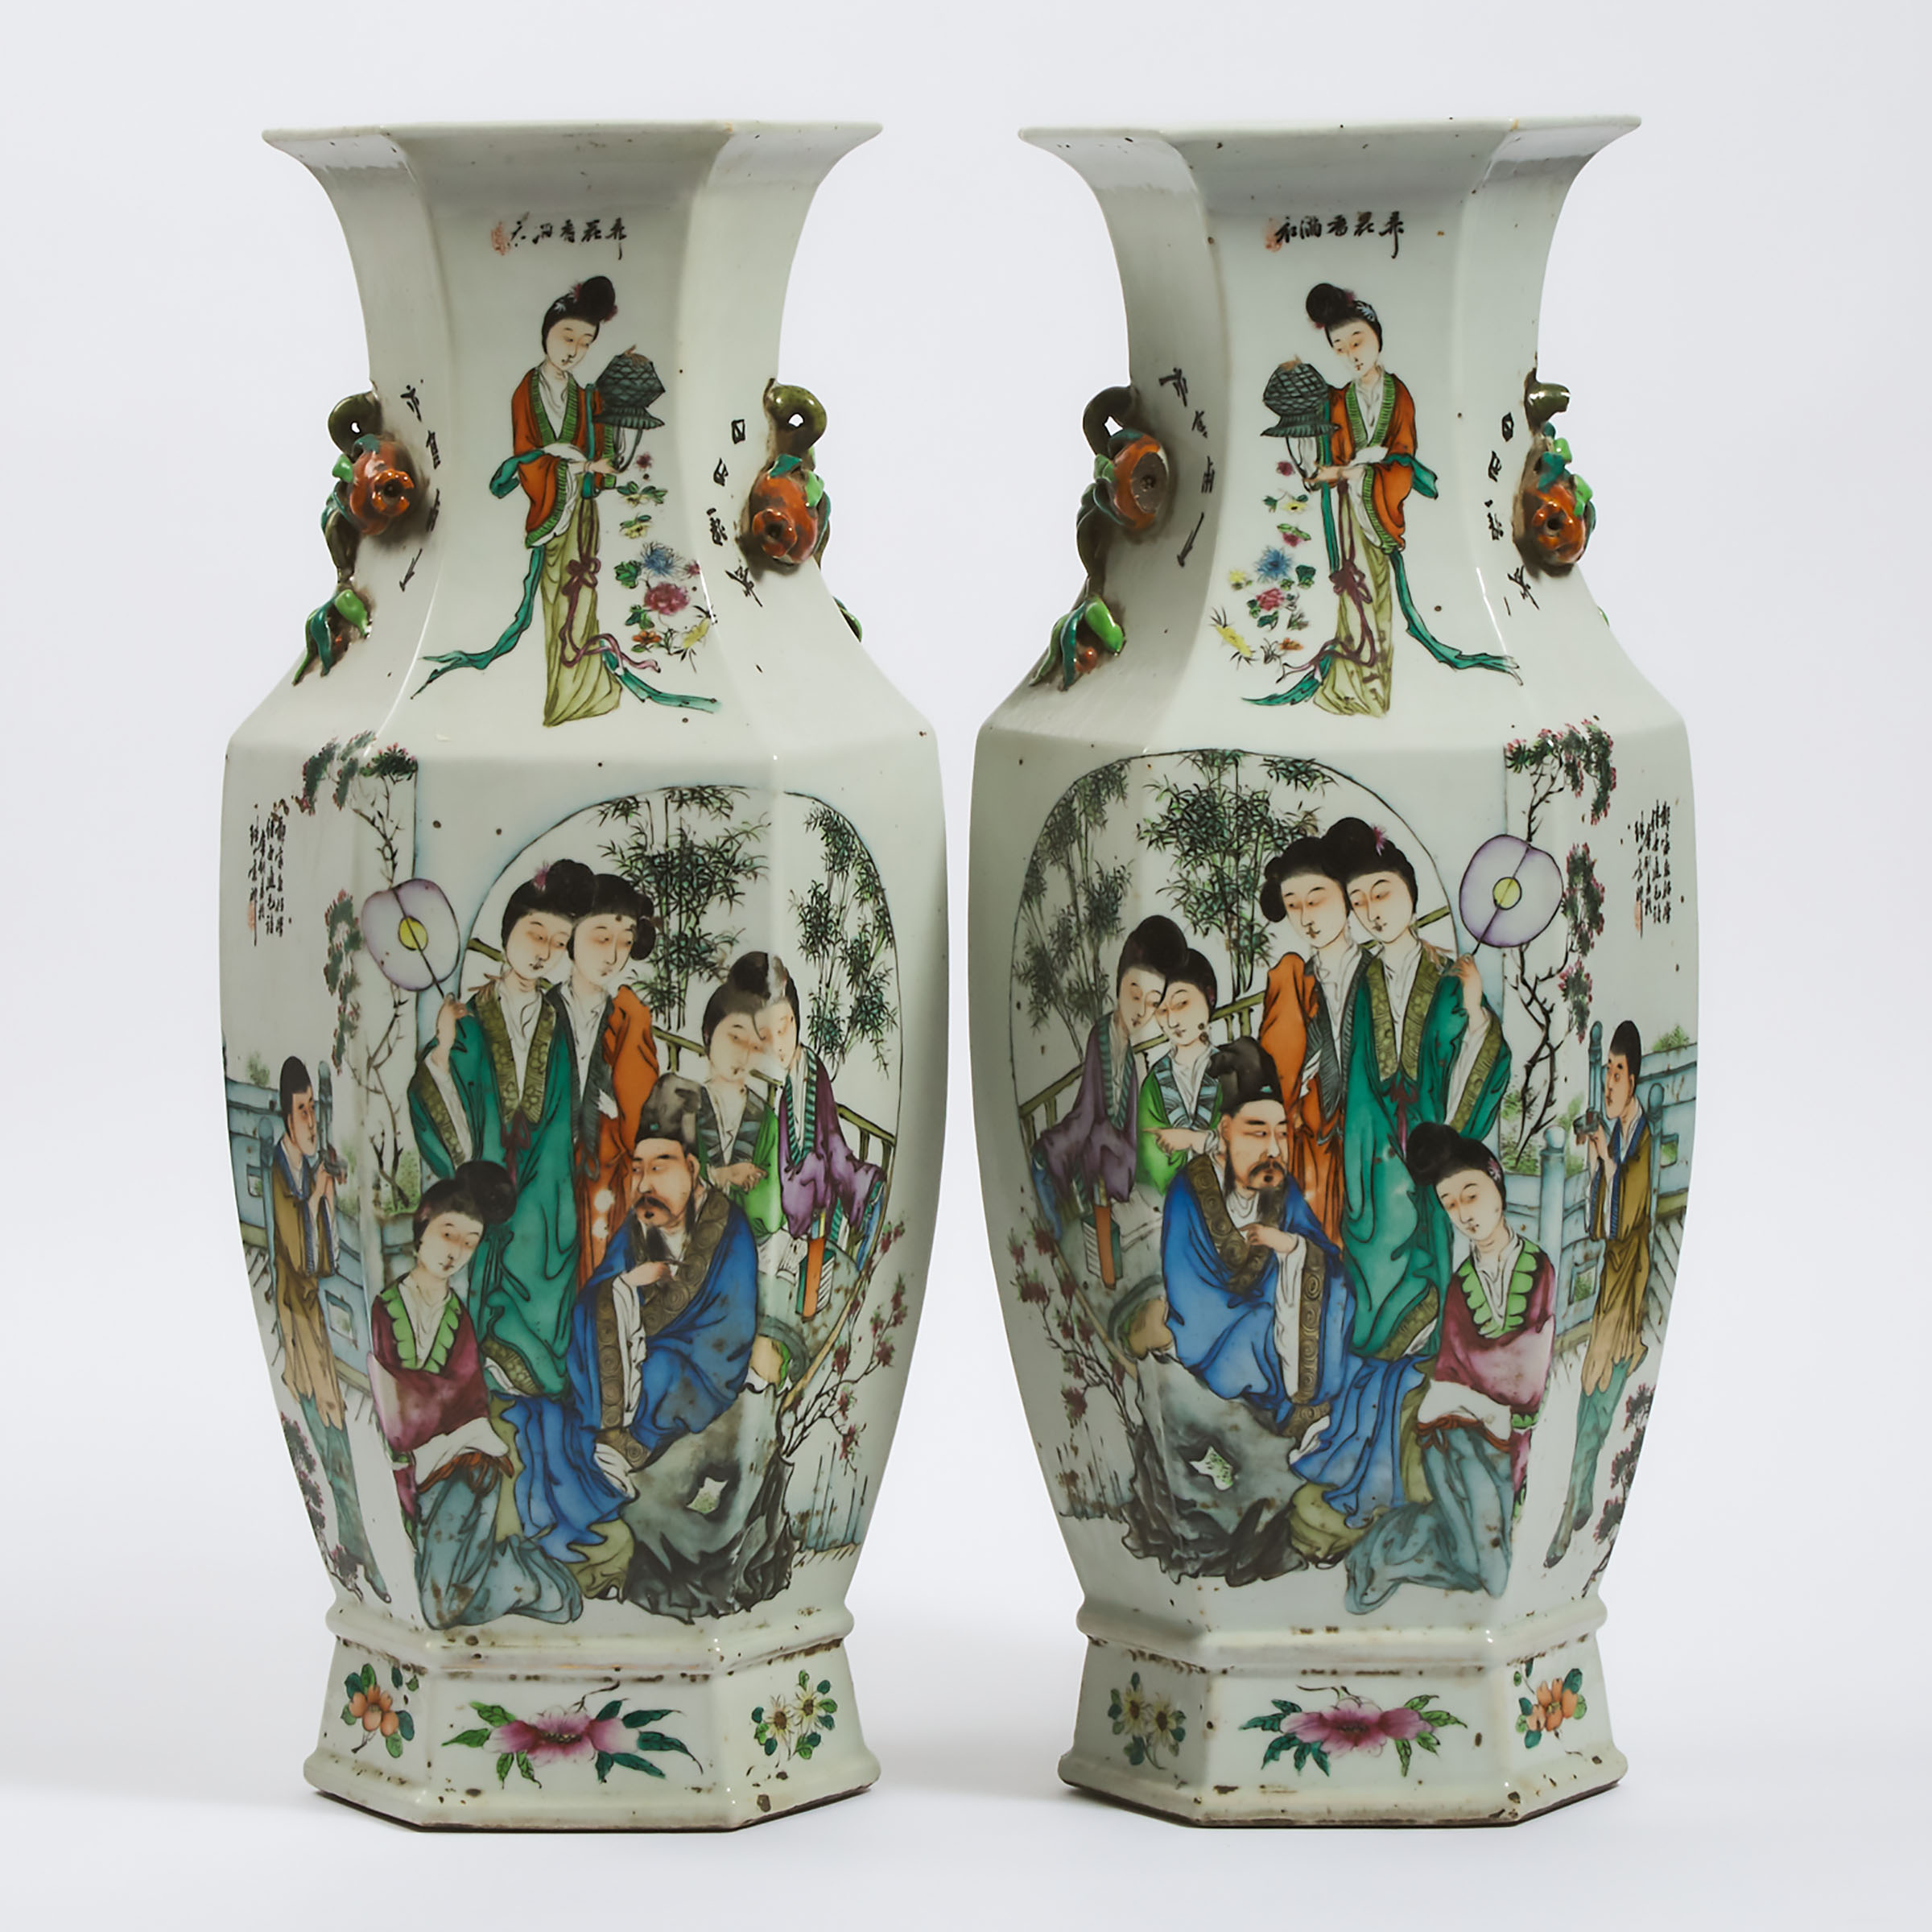 A Pair of Large Famille Rose Hexagonal Vases, Republican Period